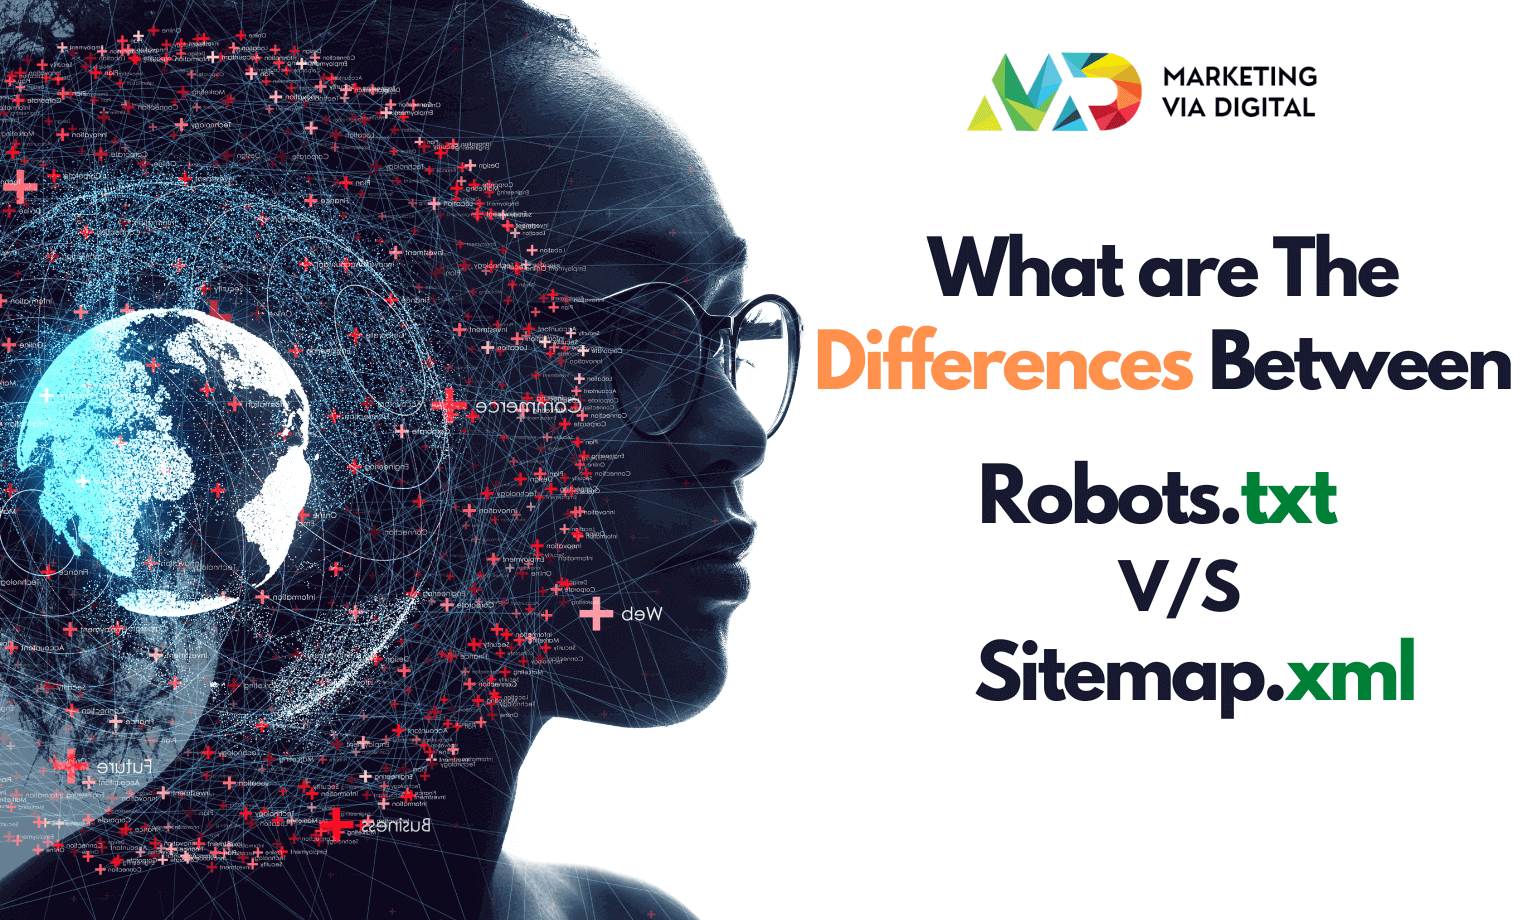 What are the differences between robots.txt and sitemap.xml?